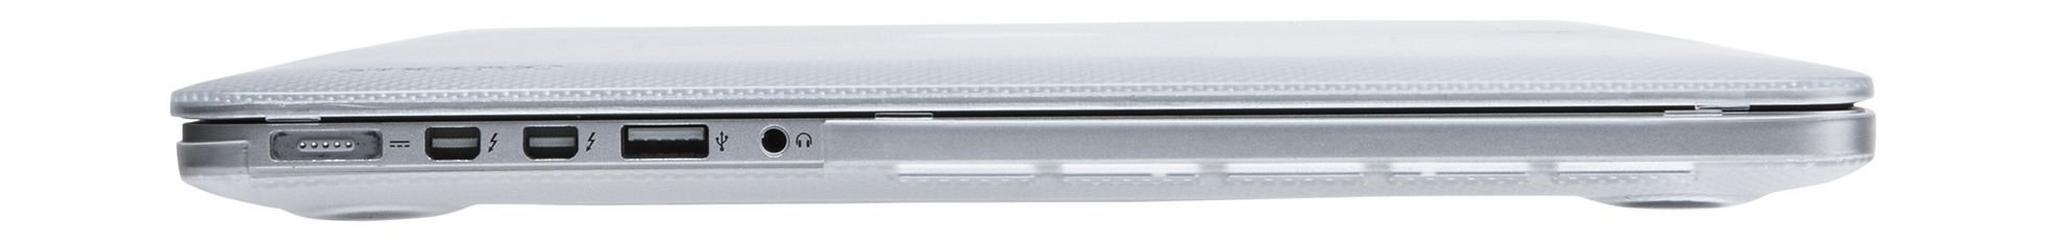 Incase Dots Protective Hardshell Case for MacBook Pro Retina 13.3-inch (CL60608) - Clear